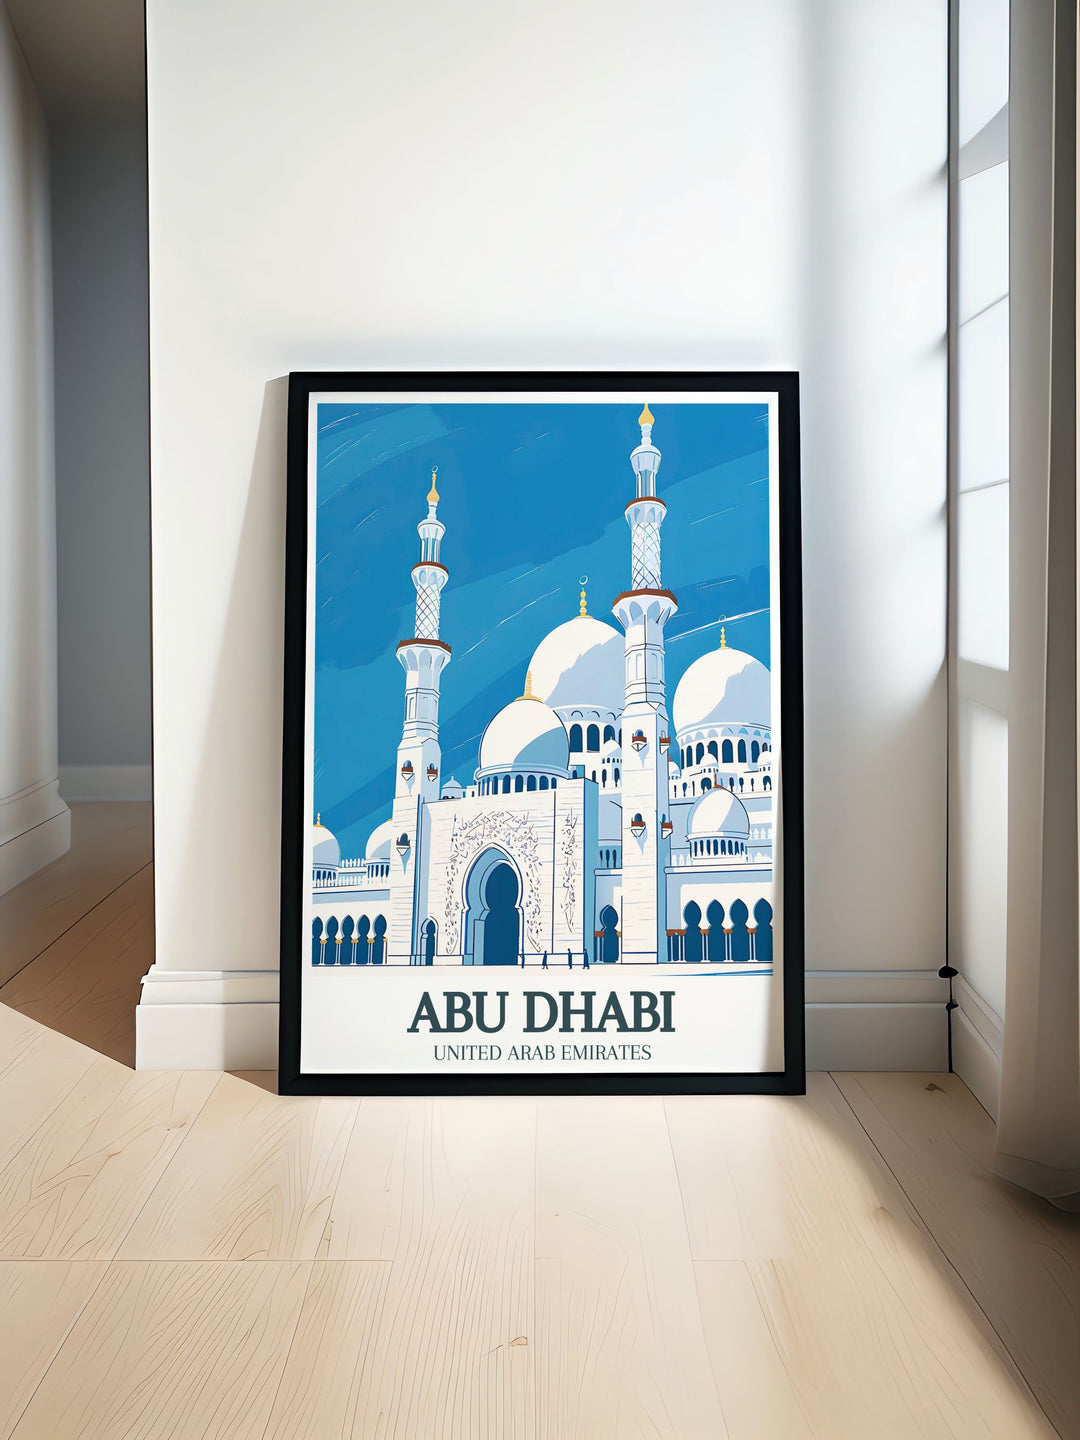 Stunning art print featuring the Sheikh Zayed Grand Mosque, Al Rawdah in Abu Dhabi. This Emirates poster captures the mosques architectural brilliance, adding elegance to any space. Ideal for fans of Abu Dhabi art and United Emirates decor.